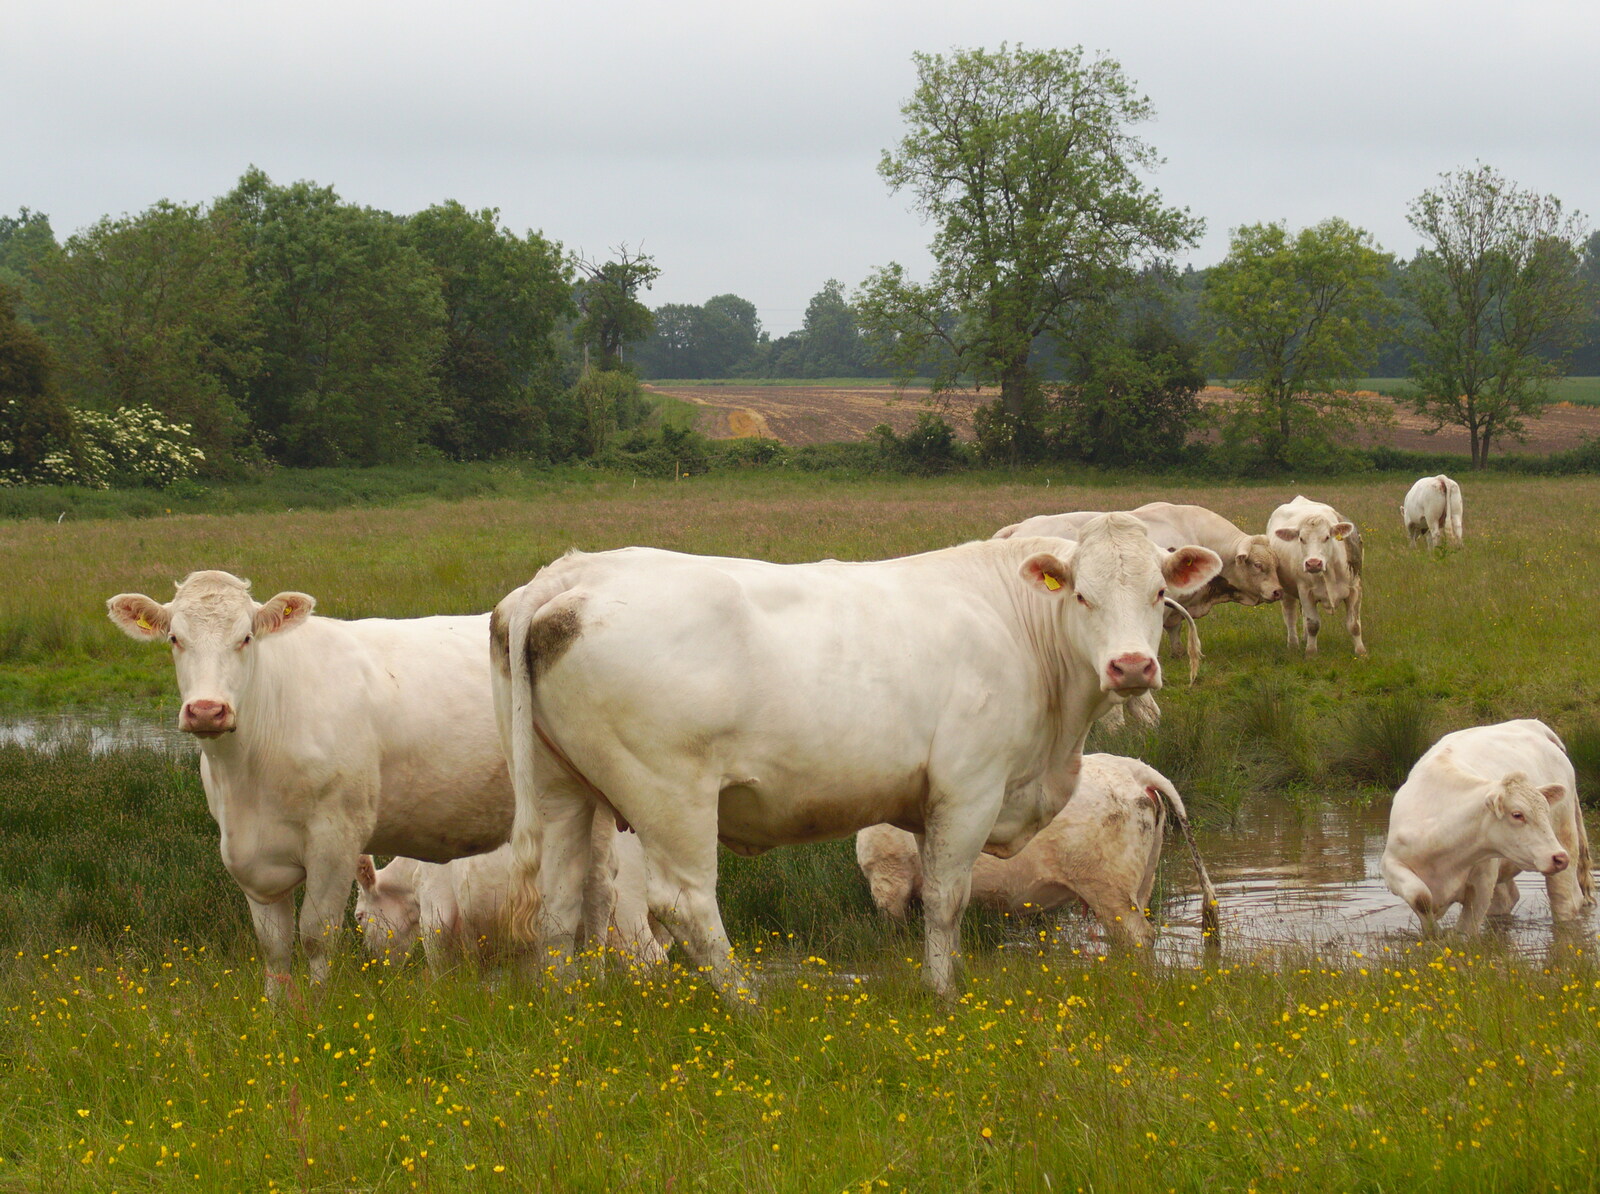 Cows in a field in Mellis, like an old oil painting from The BSCC at the Railway Tavern, Mellis, Suffolk - 28th May 2014